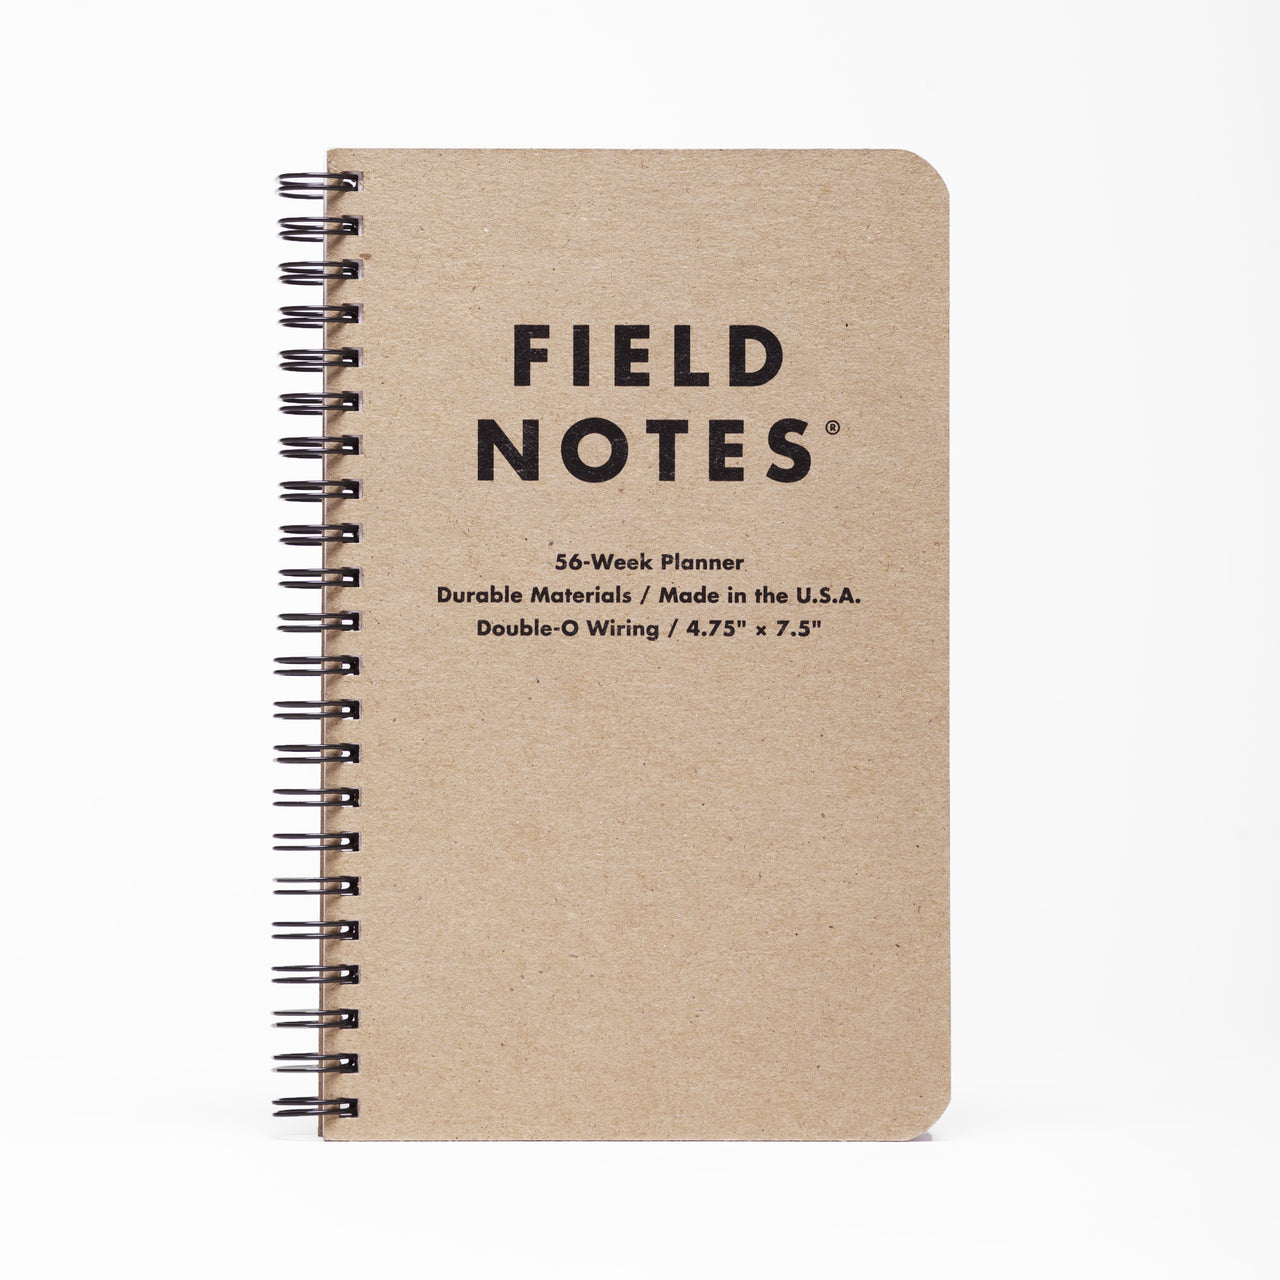 Field Notes Planner has your needs for time management covered. The size is 4-3/4 x 7-1/2, with 112 pages of Finch 70# text paper and a durable chipboard cover.